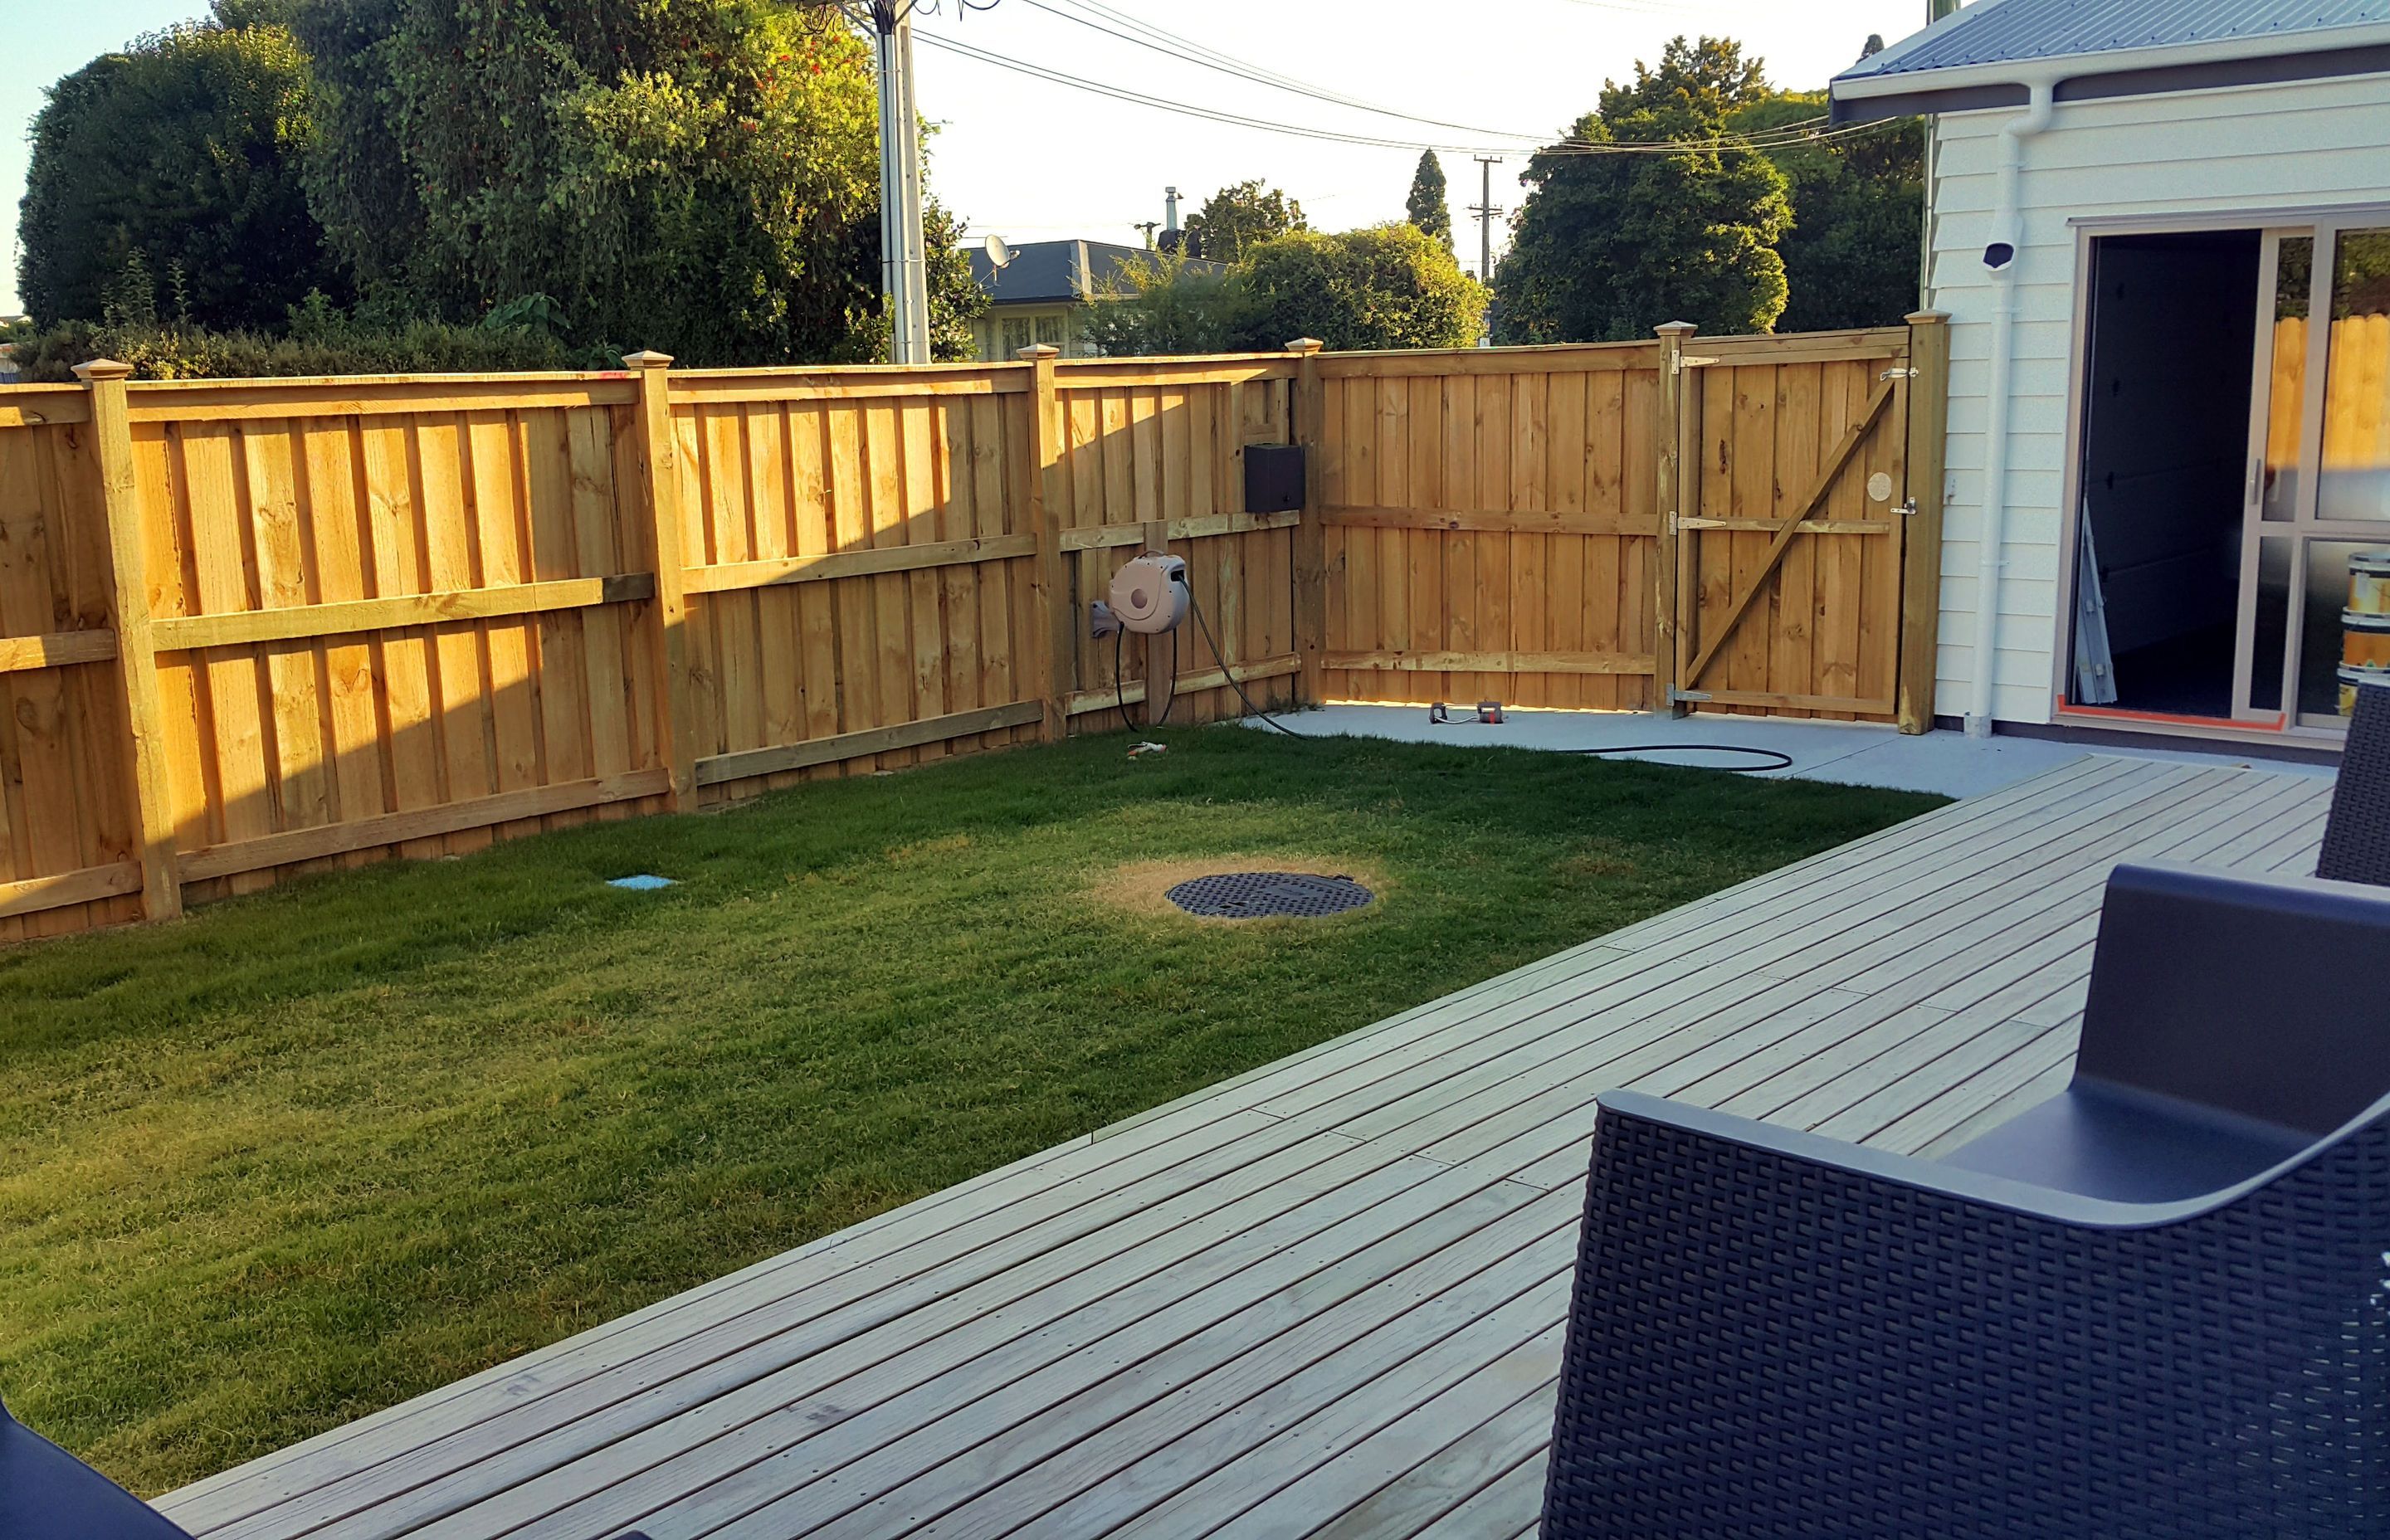 New double lined fence
